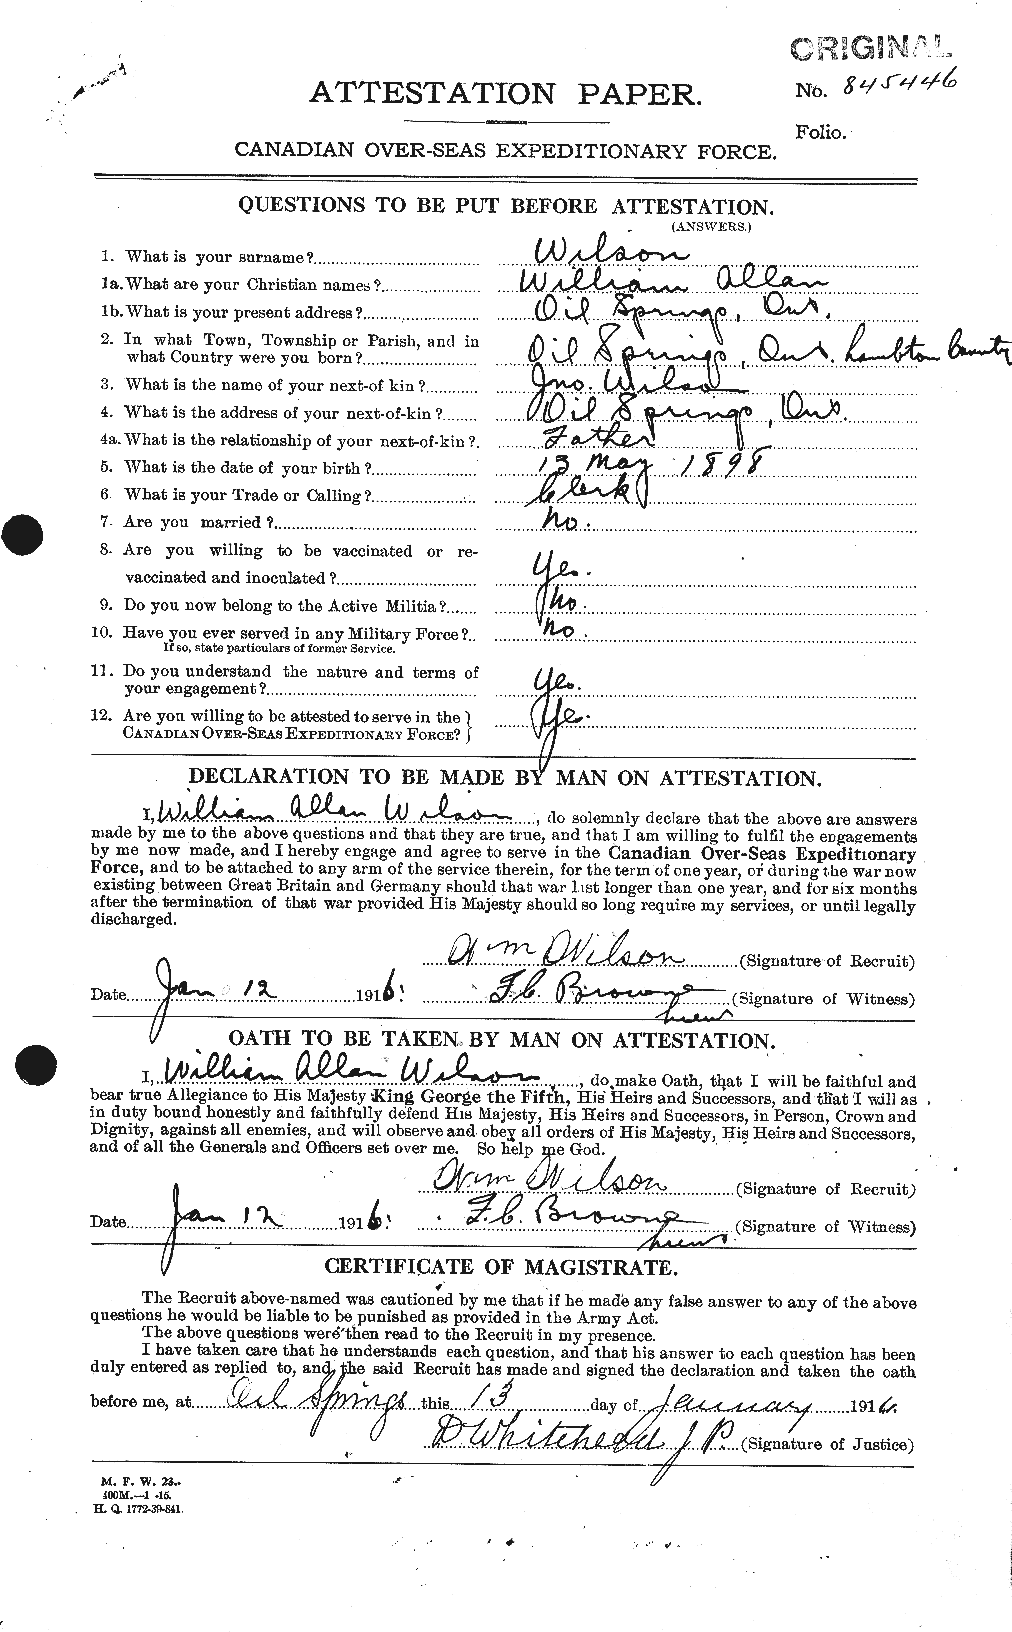 Personnel Records of the First World War - CEF 681930a